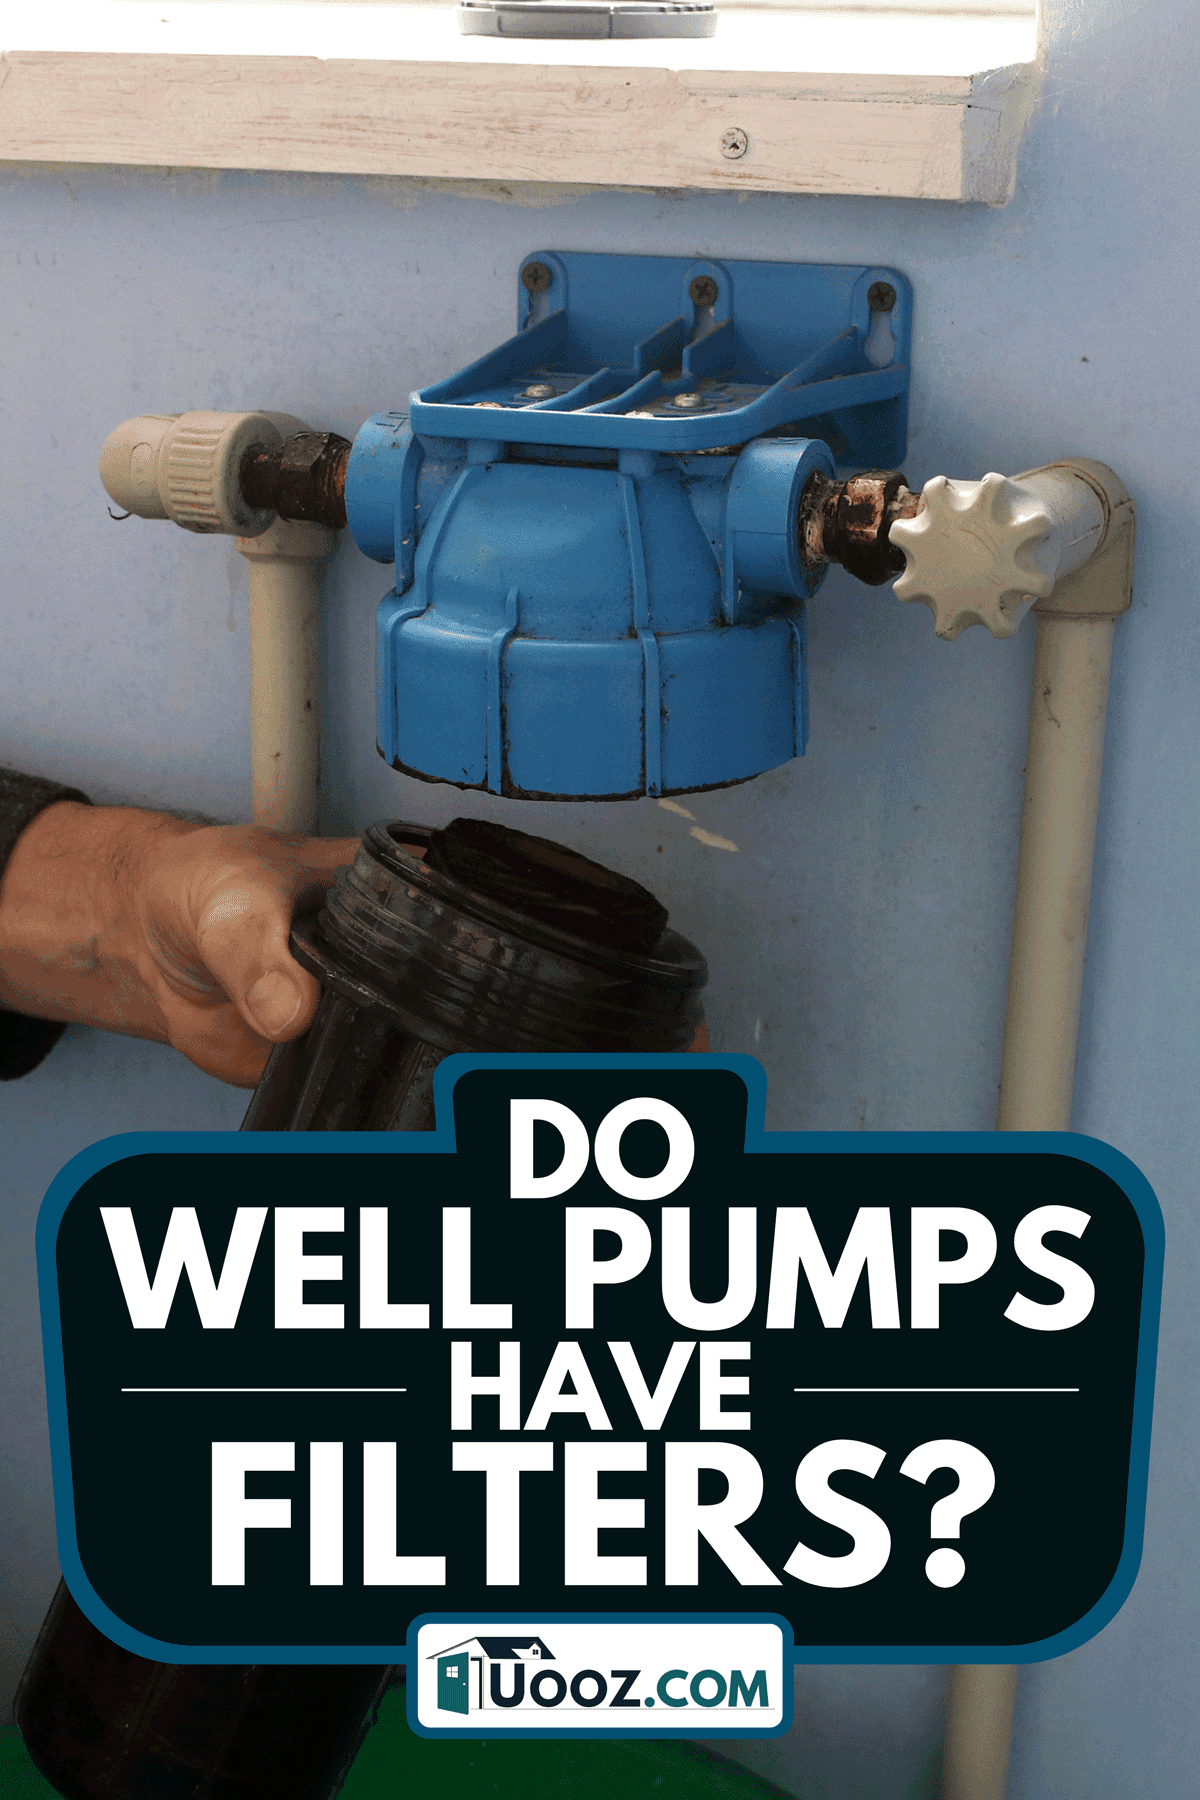 A replacement of water filter cartridge, Do Well Pumps Have Filters?